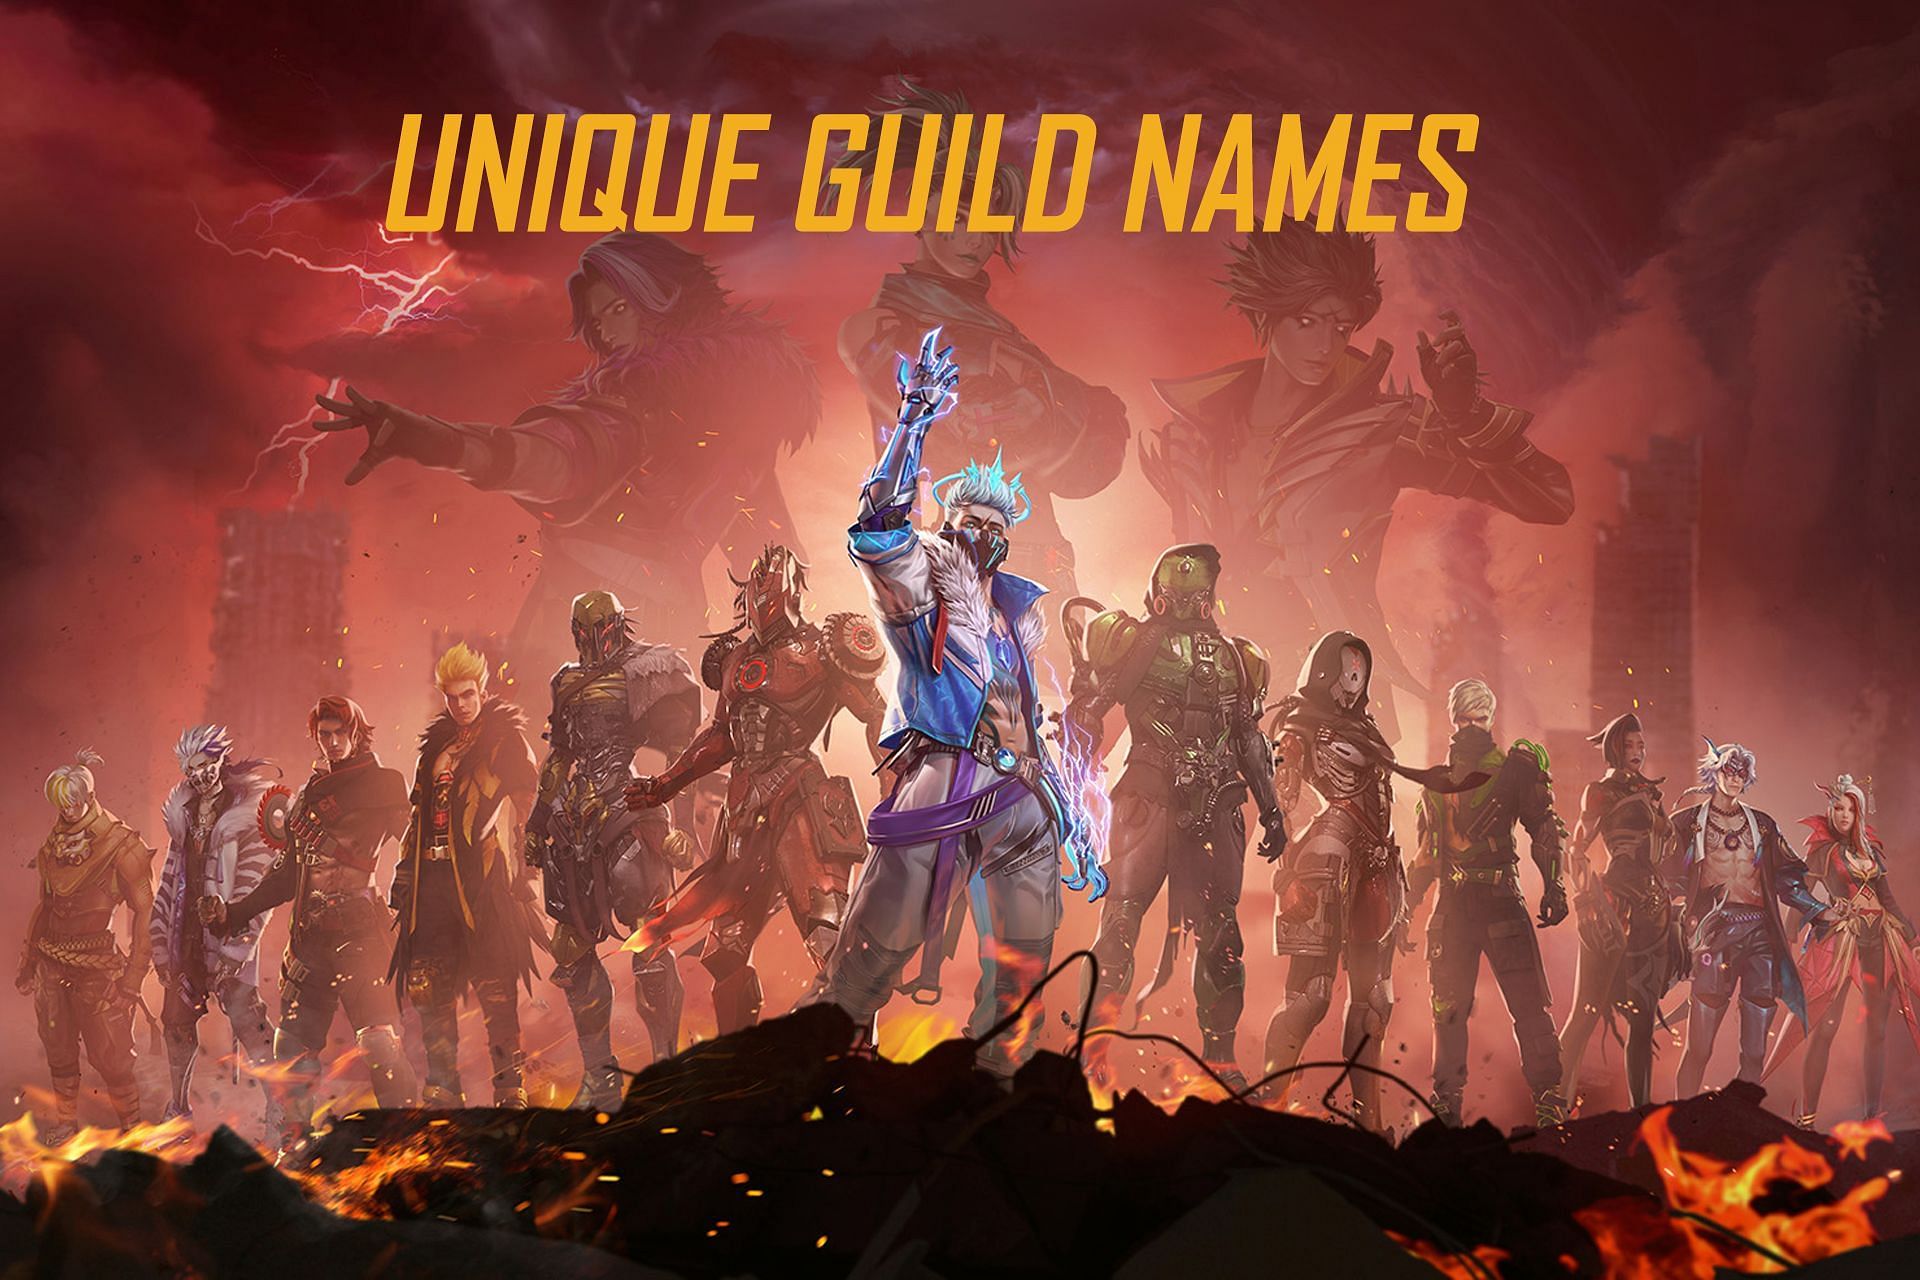 100 best and unique guild names to use in Free Fire